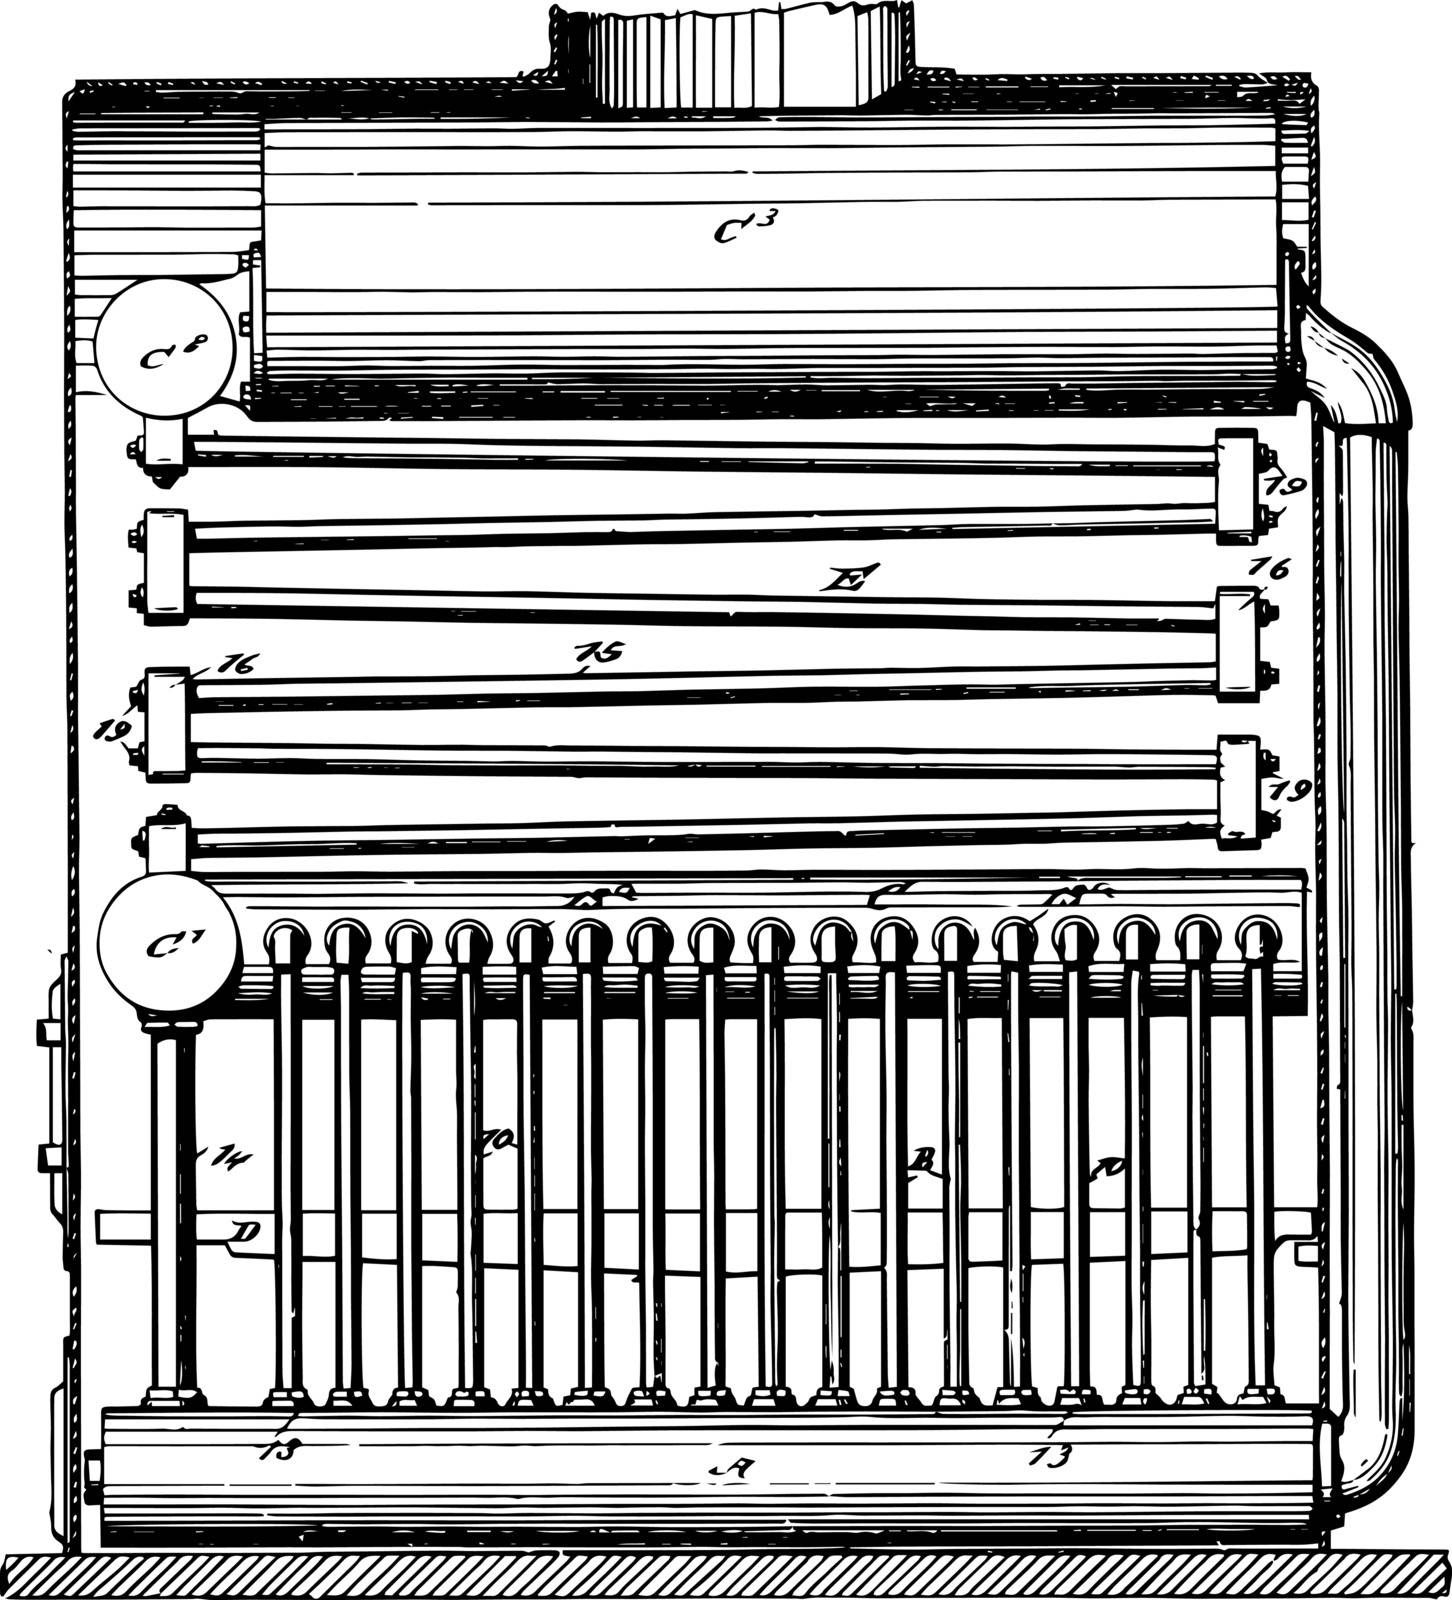 This illustration represents a boiler is a closed vessel in which water or other fluid is heated vintage line drawing or engraving illustration.